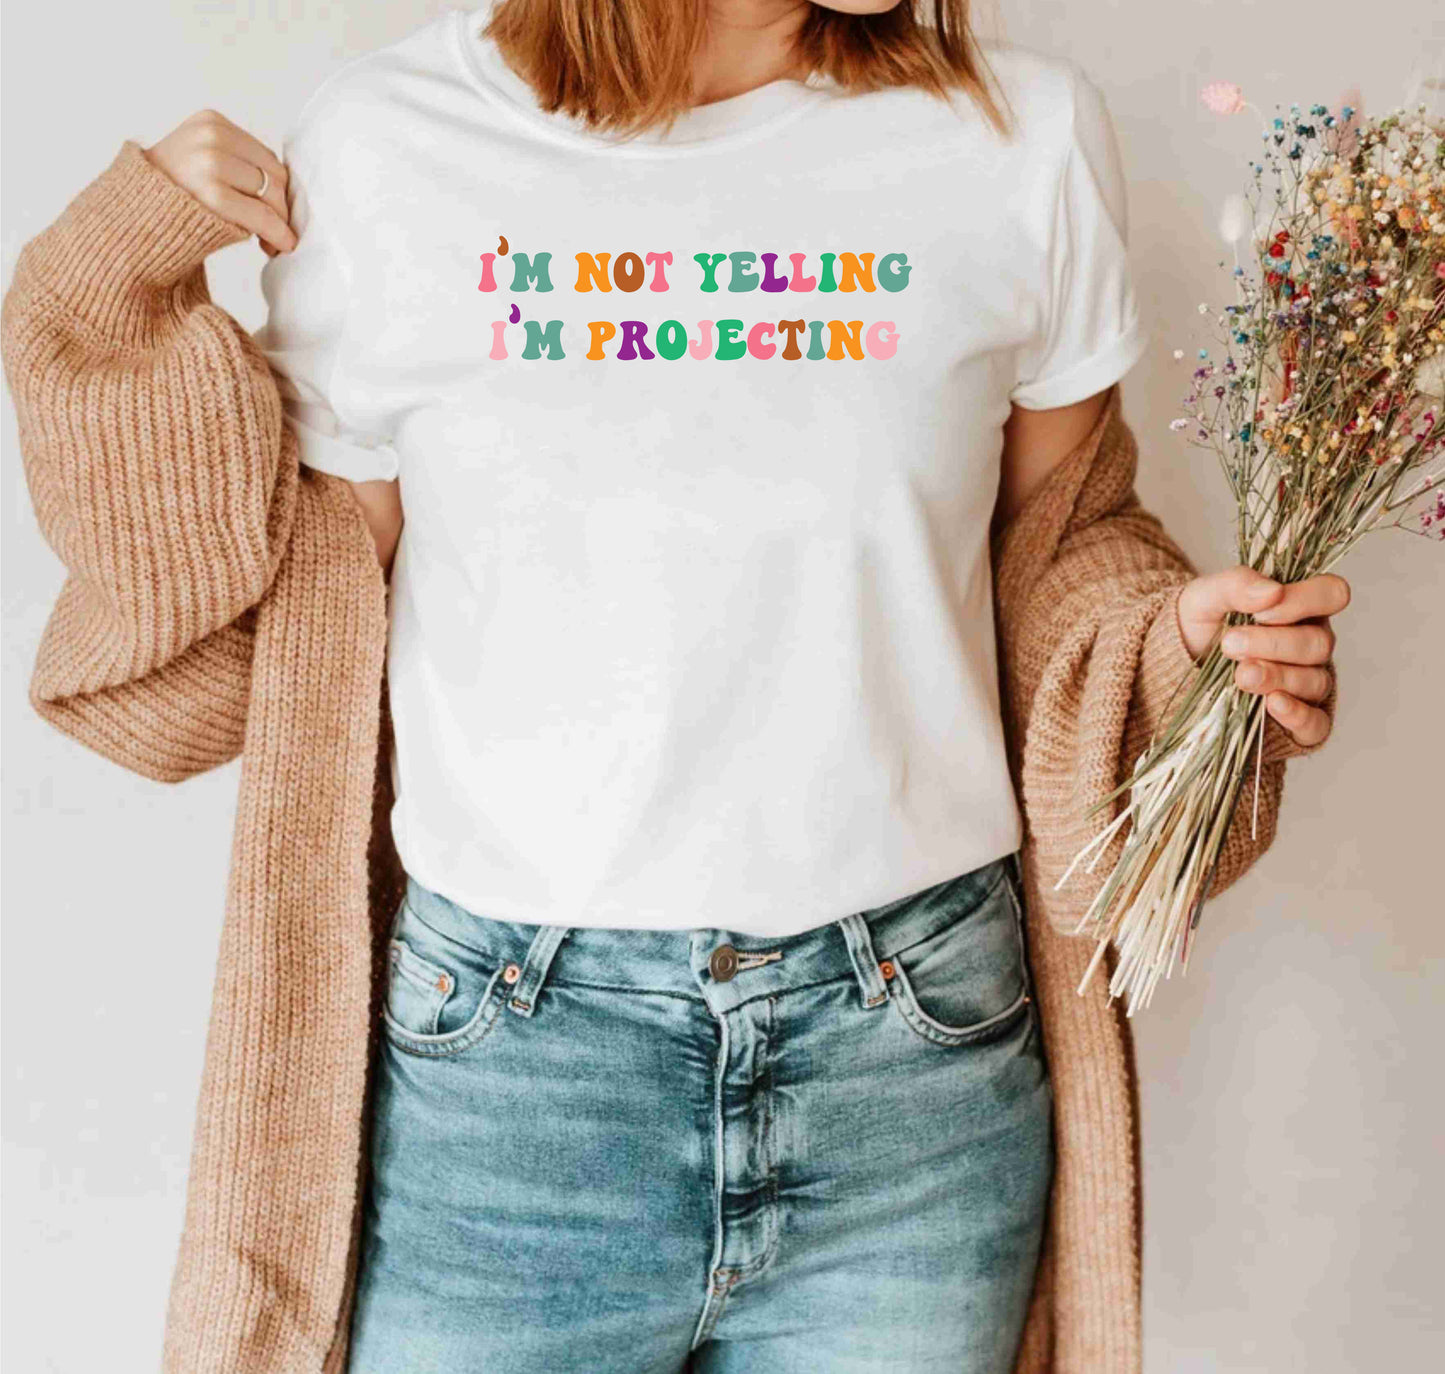 I'm Not Yelling I'm Projecting Theater Audition Actor Actress T-Shirts